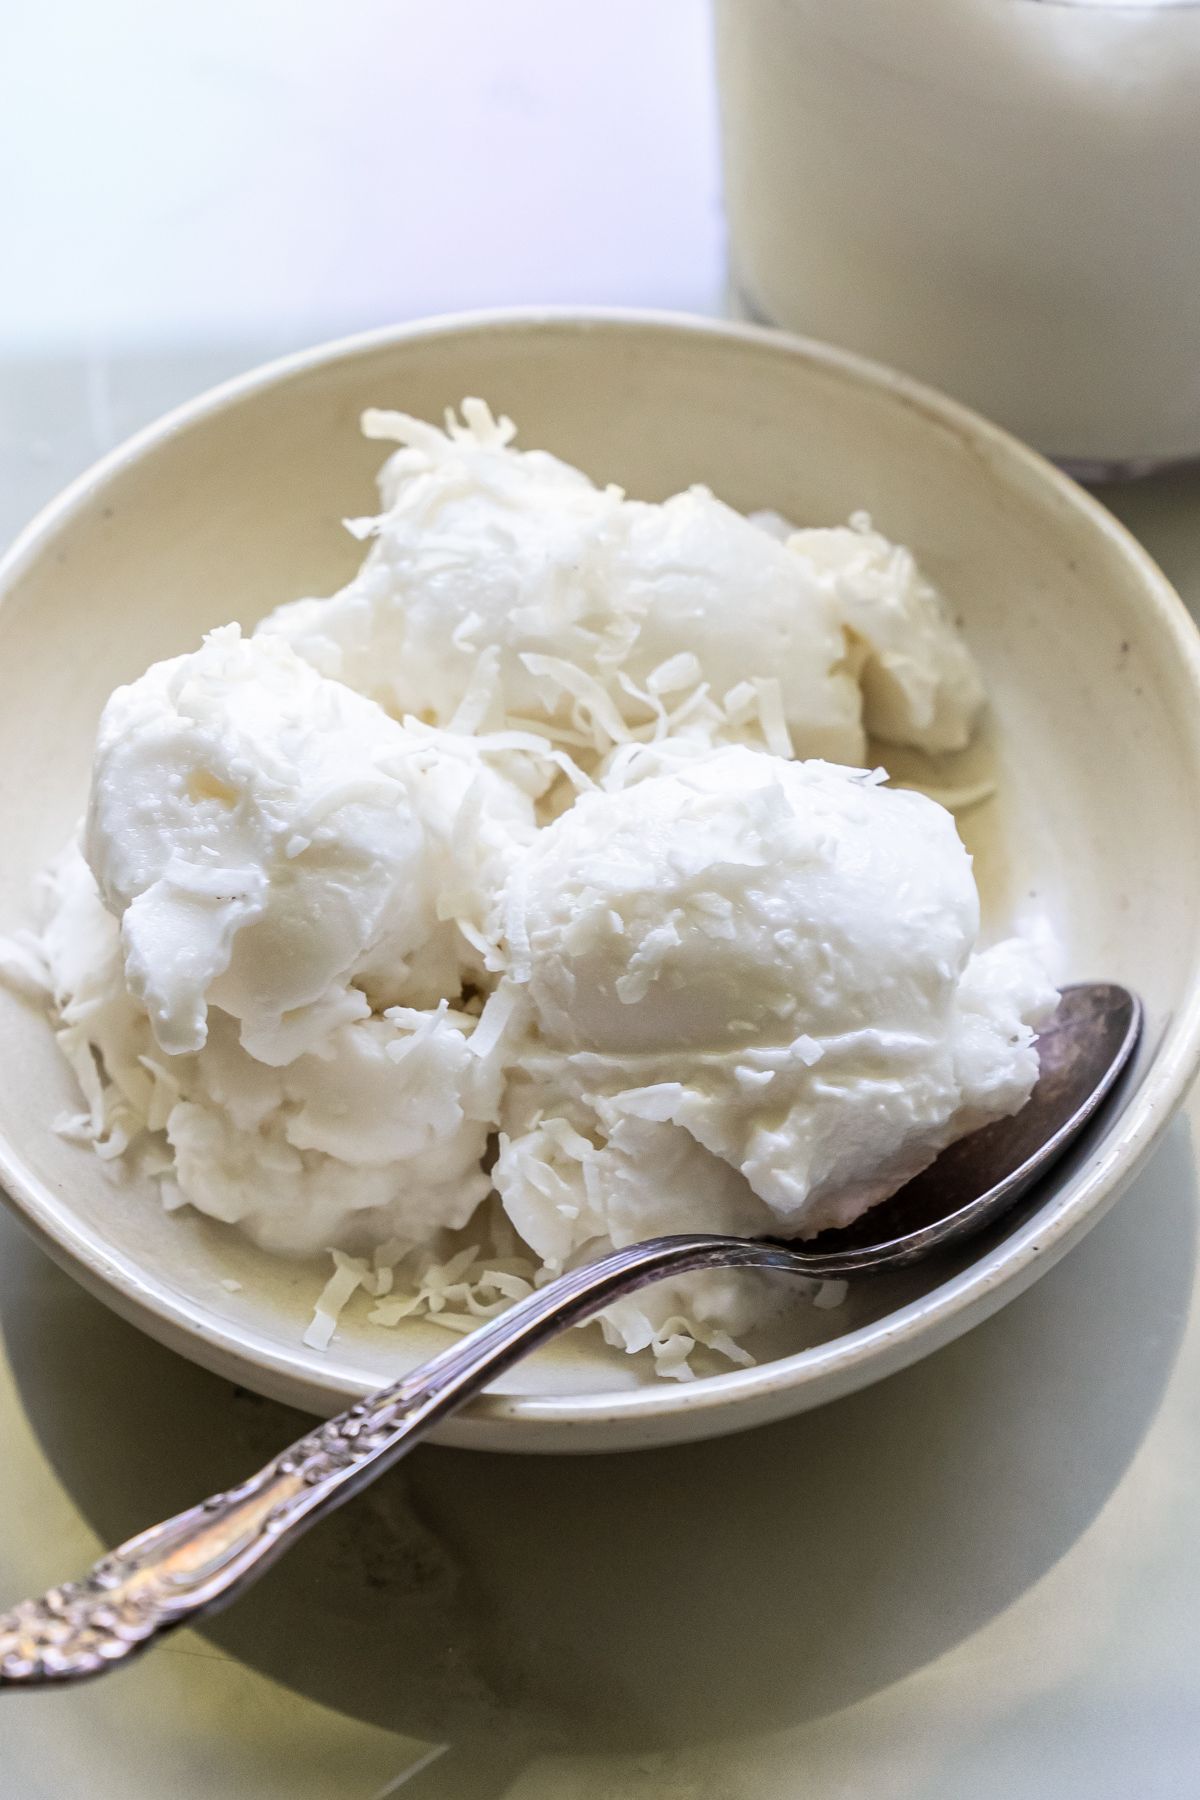 A white bowl with several scoops of white ice cream, crafted from Ninja Creami recipes, garnished with shredded coconut, and a silver spoon on the side.